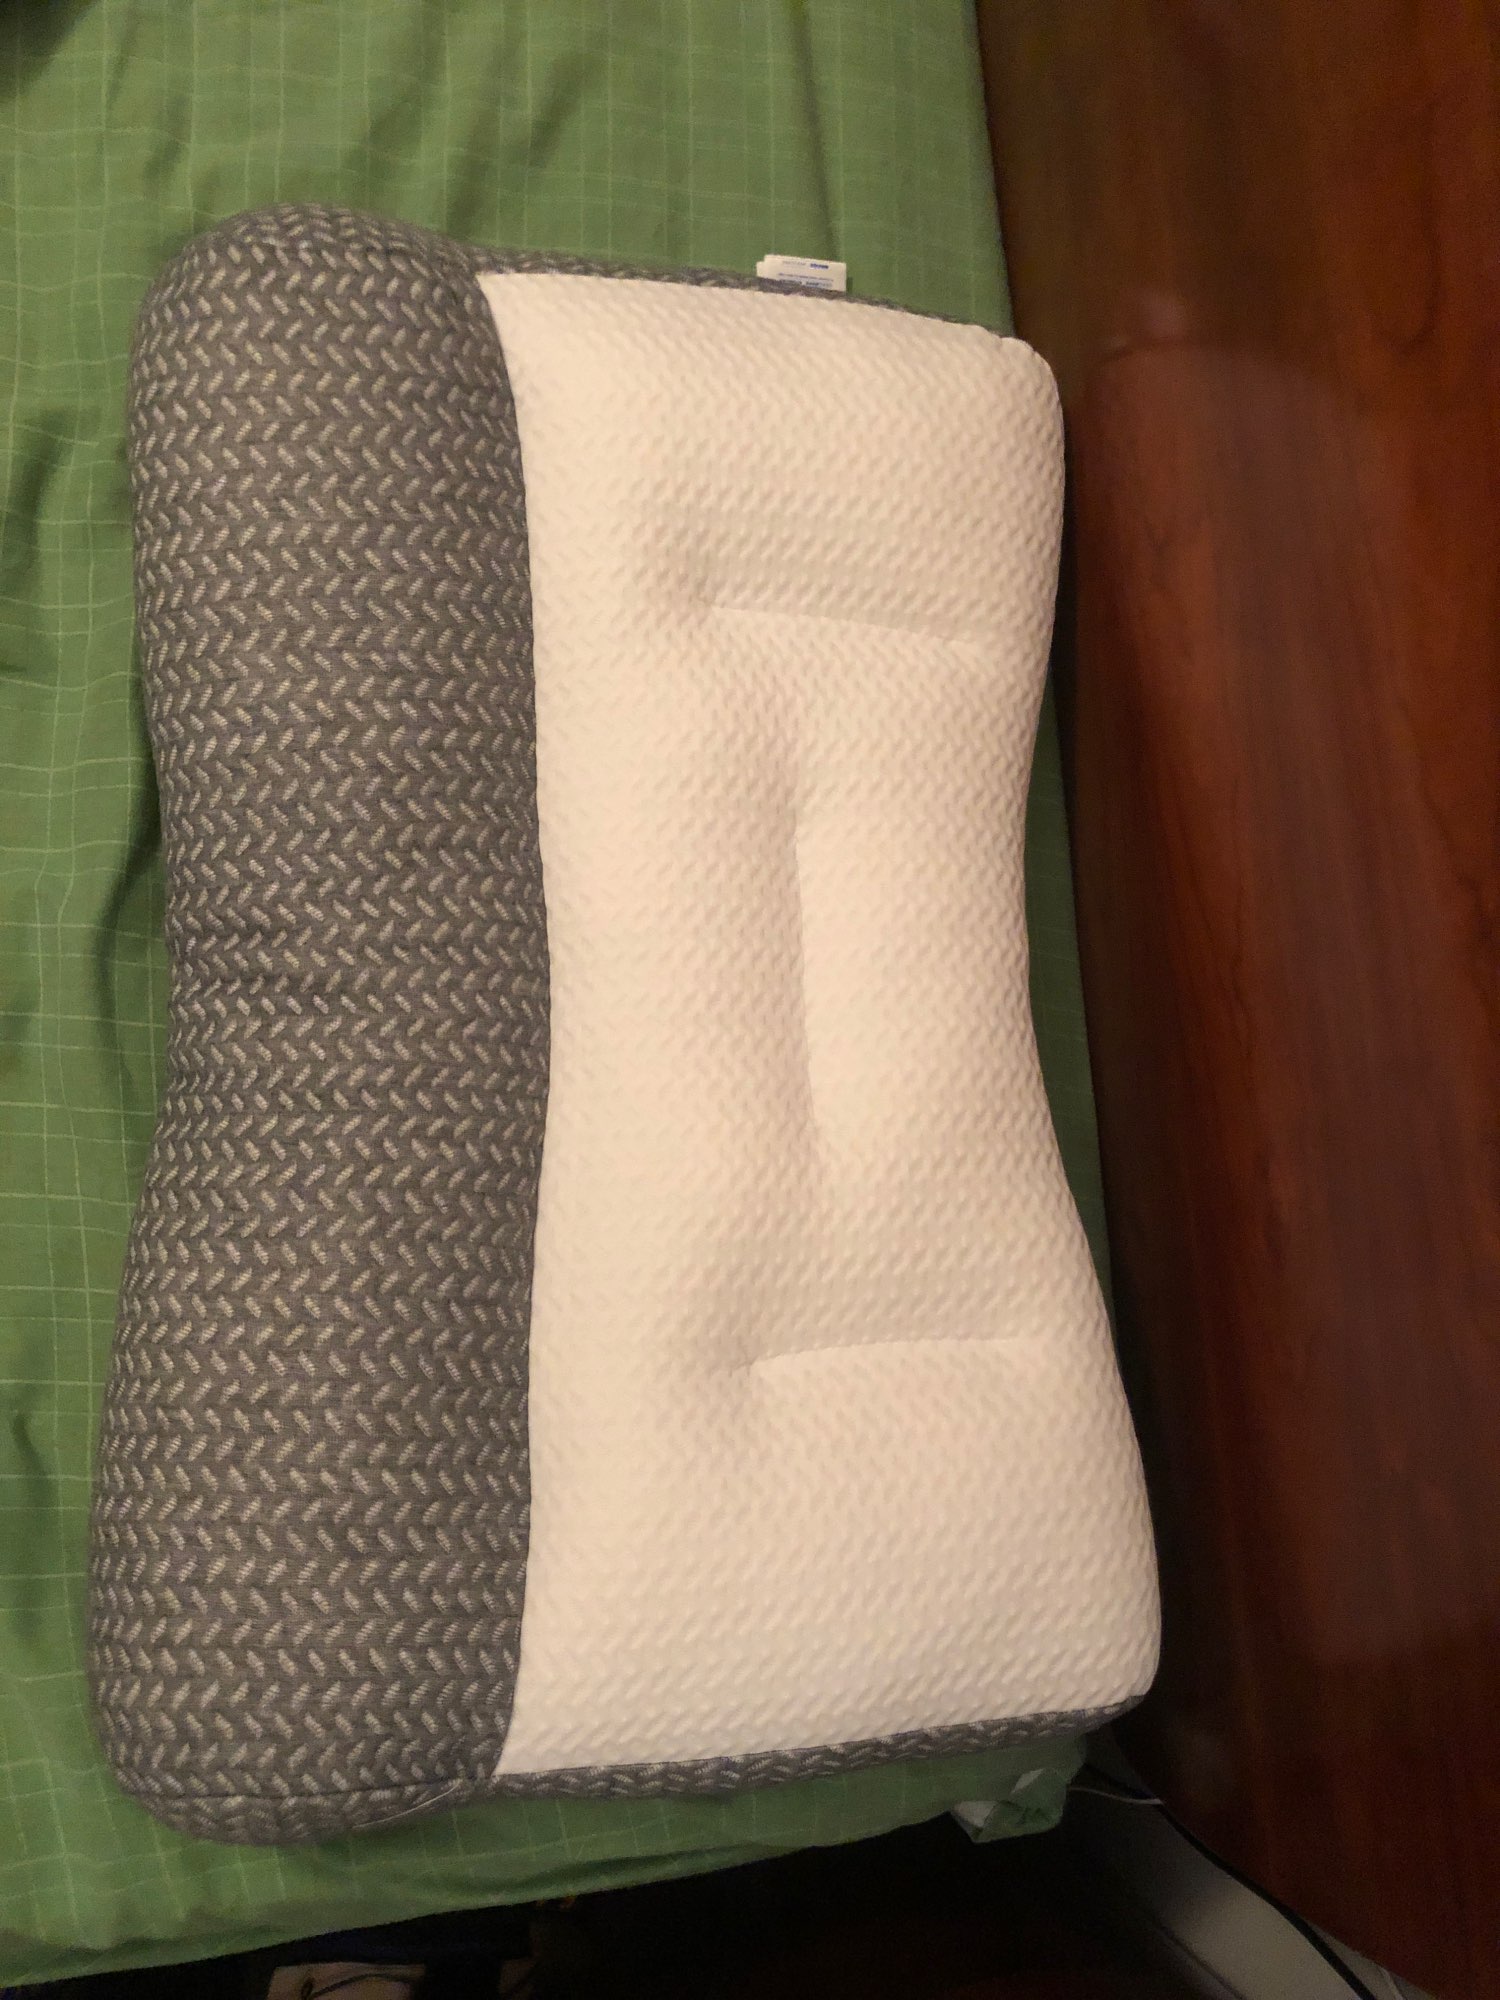 Ergonomic Cervical Relaxation Sleep Pillow For Adults photo review